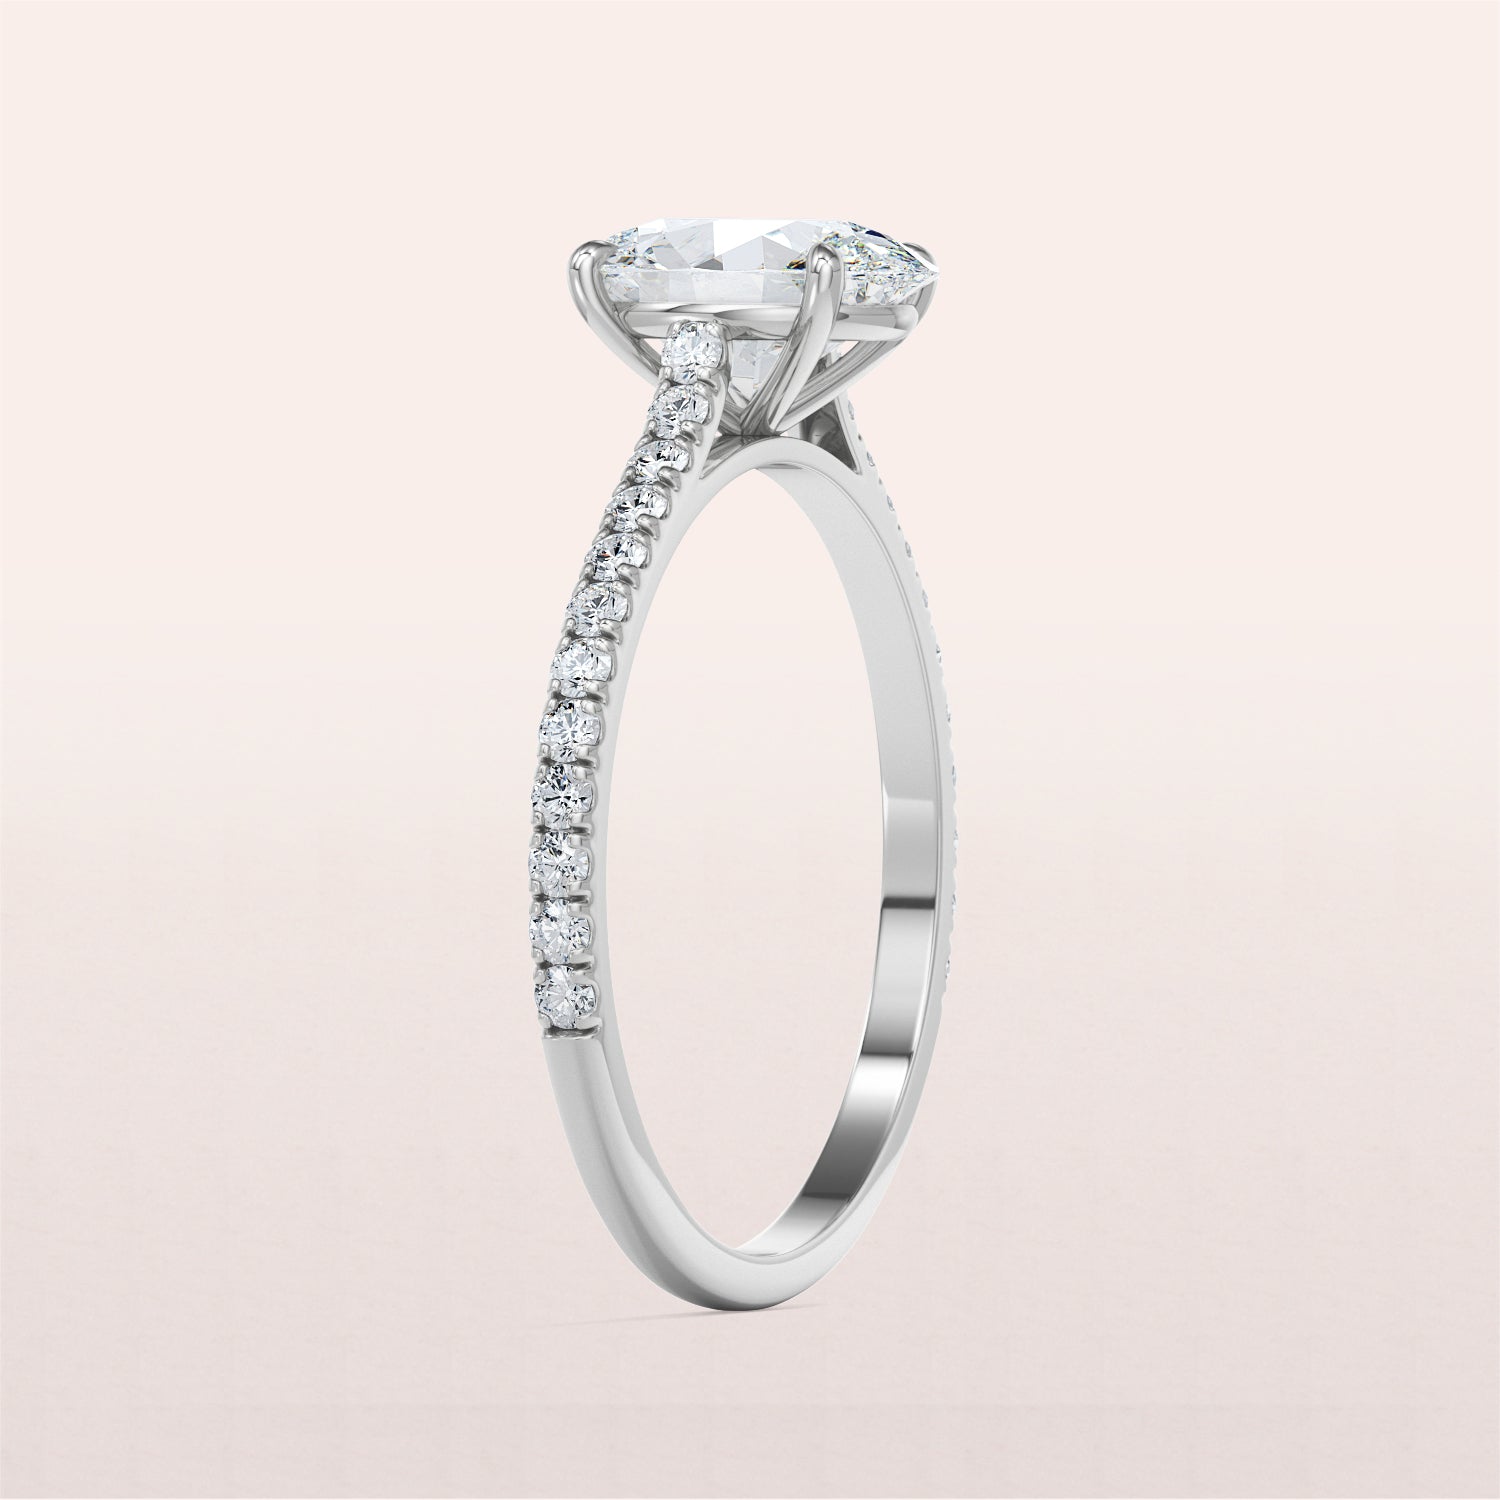 MOSCOW PAVÉ RING | WHITE